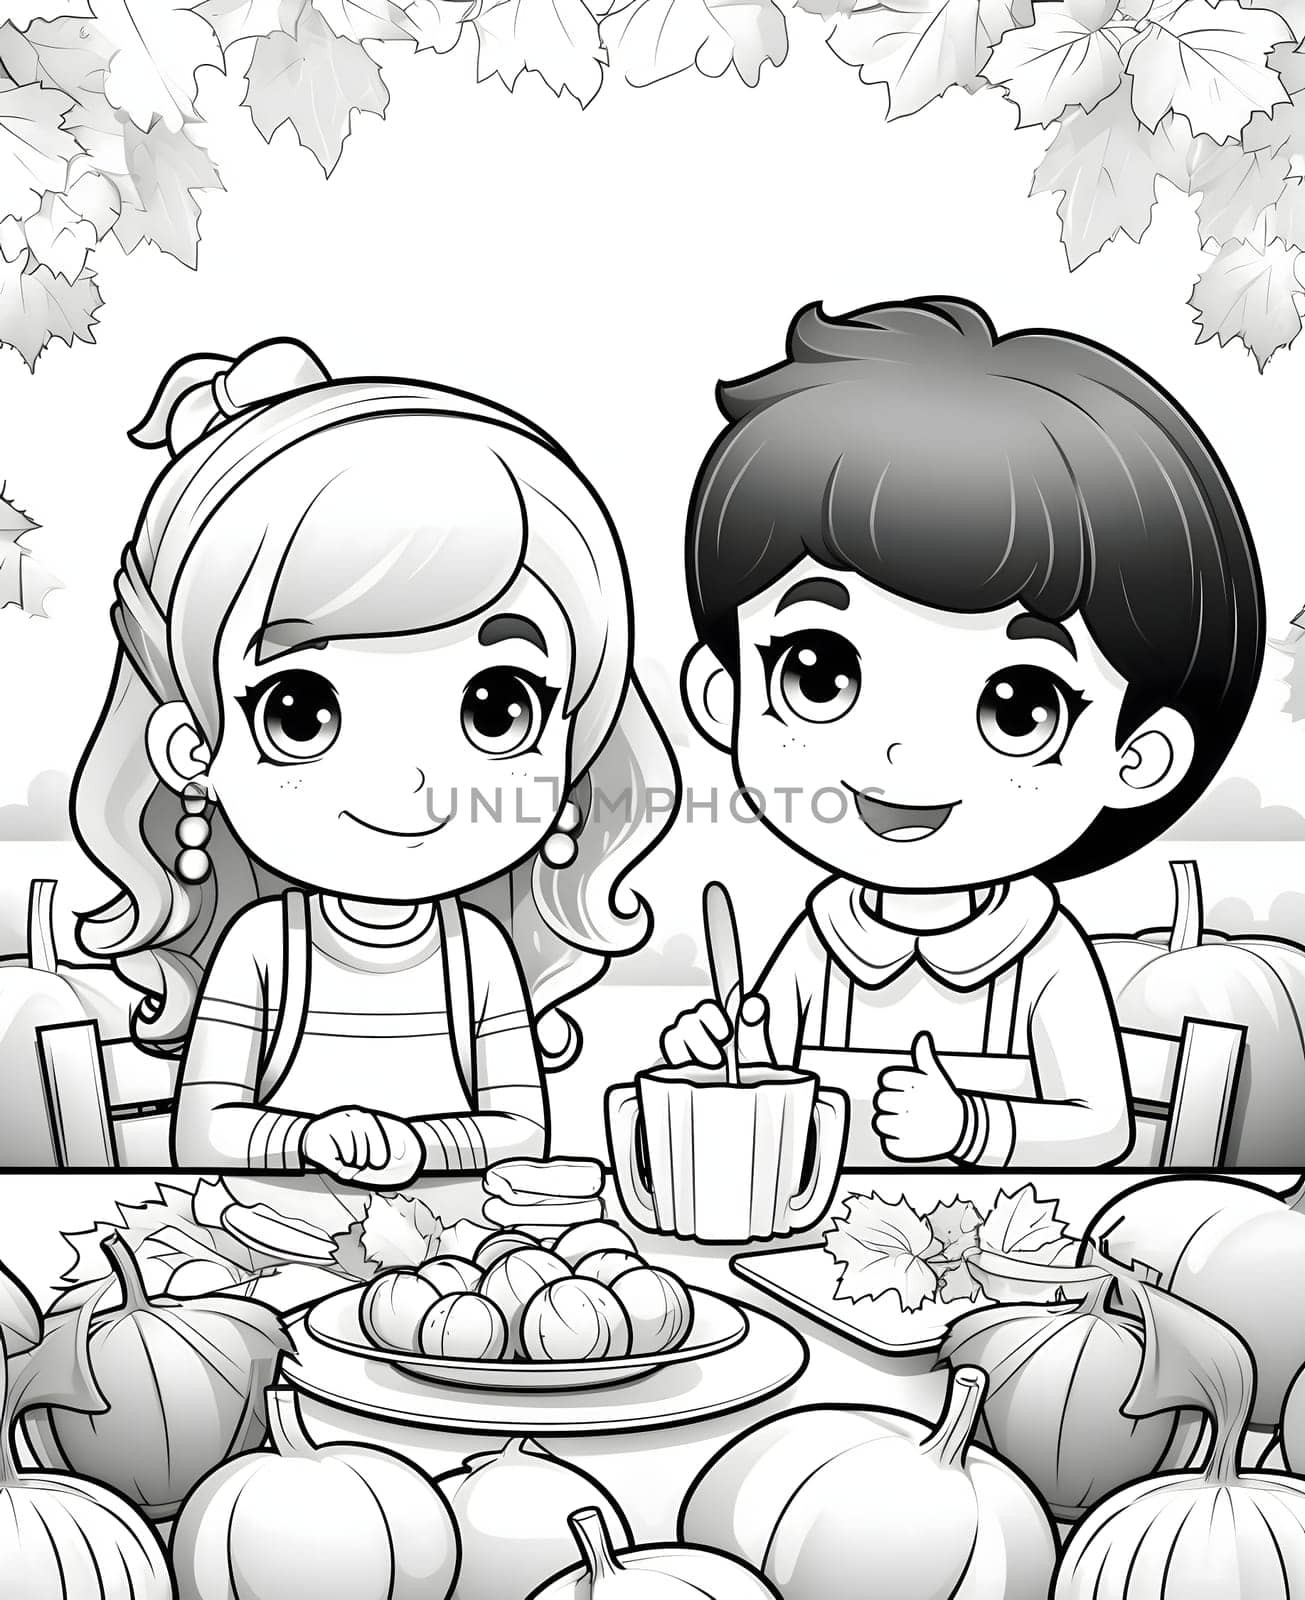 Black and White coloring book, boy and girl at a table full of pumpkins. Pumpkin as a dish of thanksgiving for the harvest, picture on a white isolated background. Atmosphere of joy and celebration.